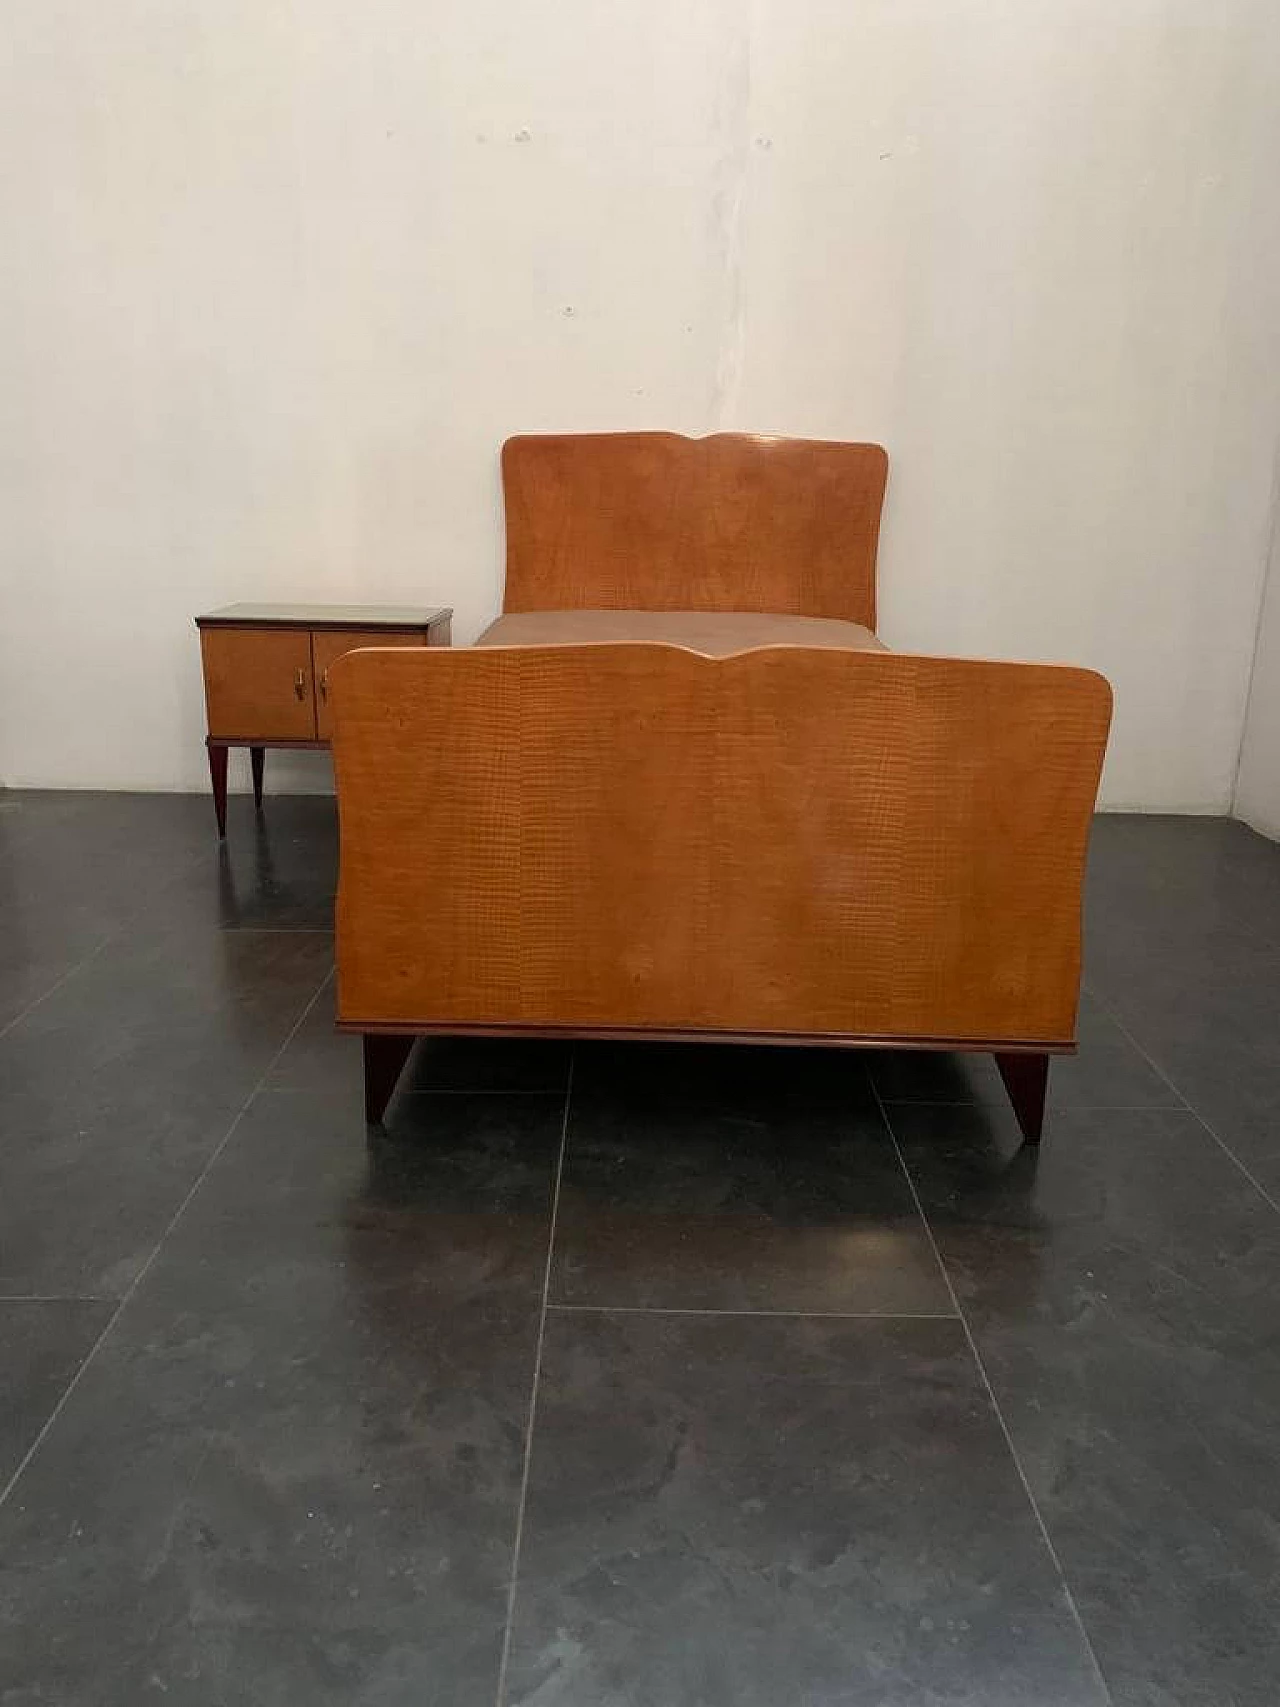 Bed and bedside table set in blond mahogany wood, 1950s 1182212